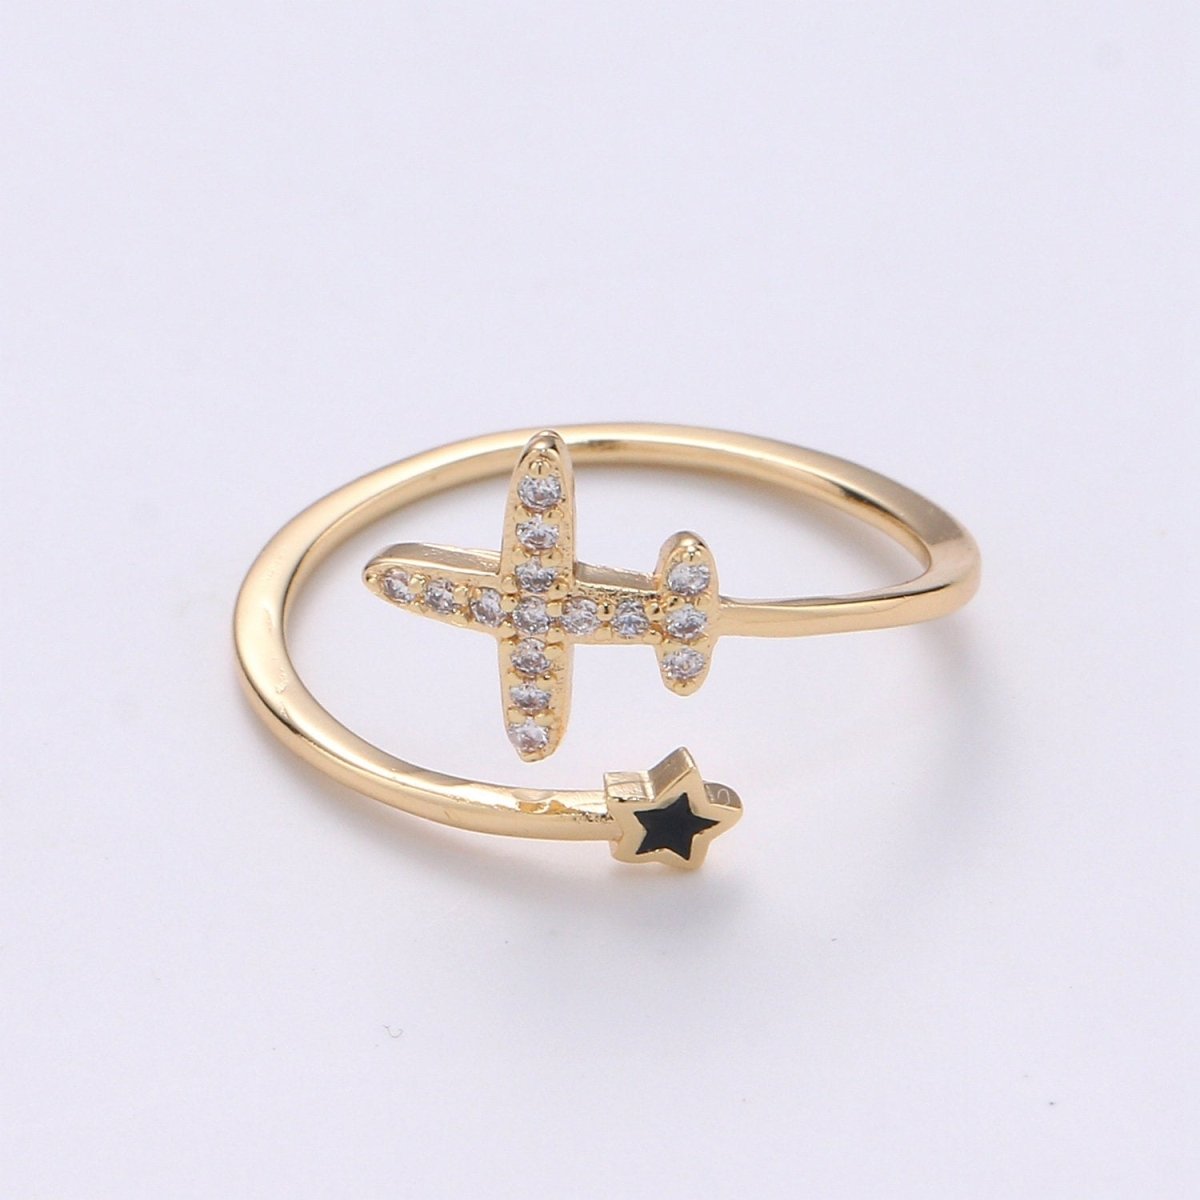 Dainty Airplane Ring, Plane Ring, Thin Open Ring Gift for Stewardess, Stackable Gold Ring, Travel Ring, Aviation Jewelry Adjustable Ring R-067 - DLUXCA